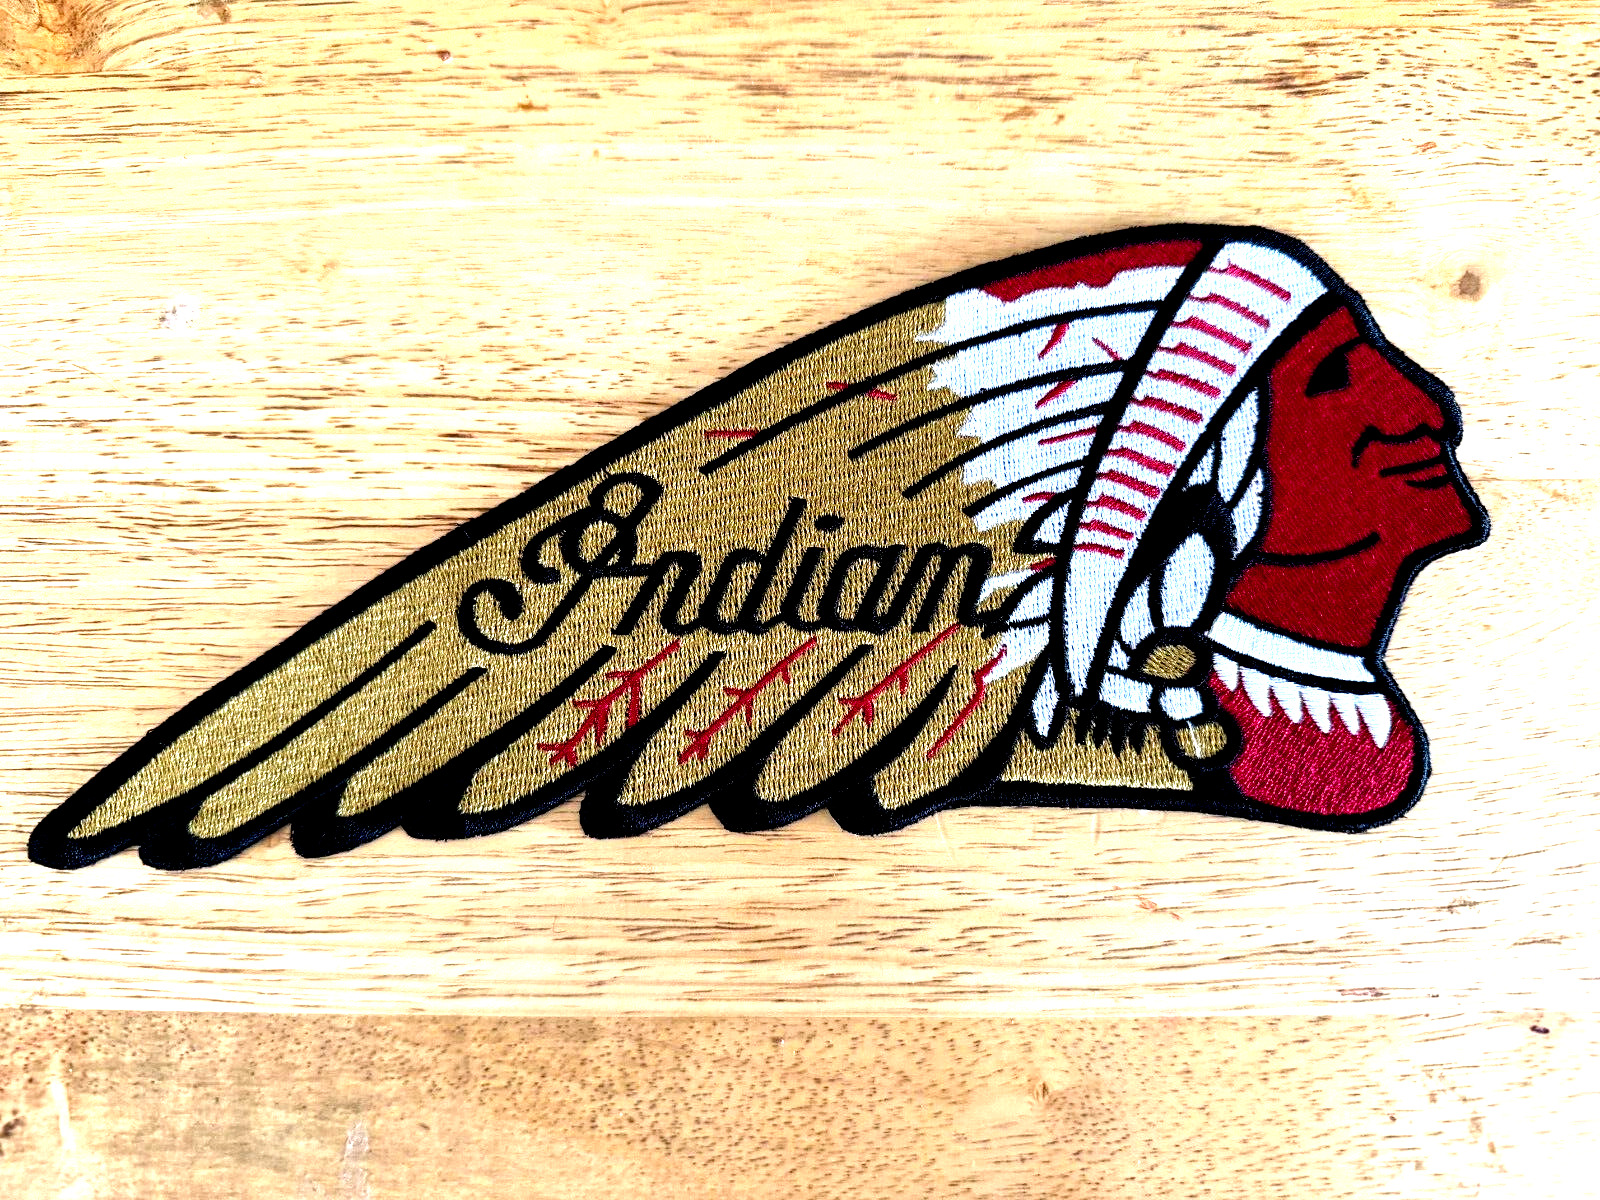 INDIAN MOTORCYCLE PATCH.....LARGE BACK PATCH.....EXCELLENT QUALITY